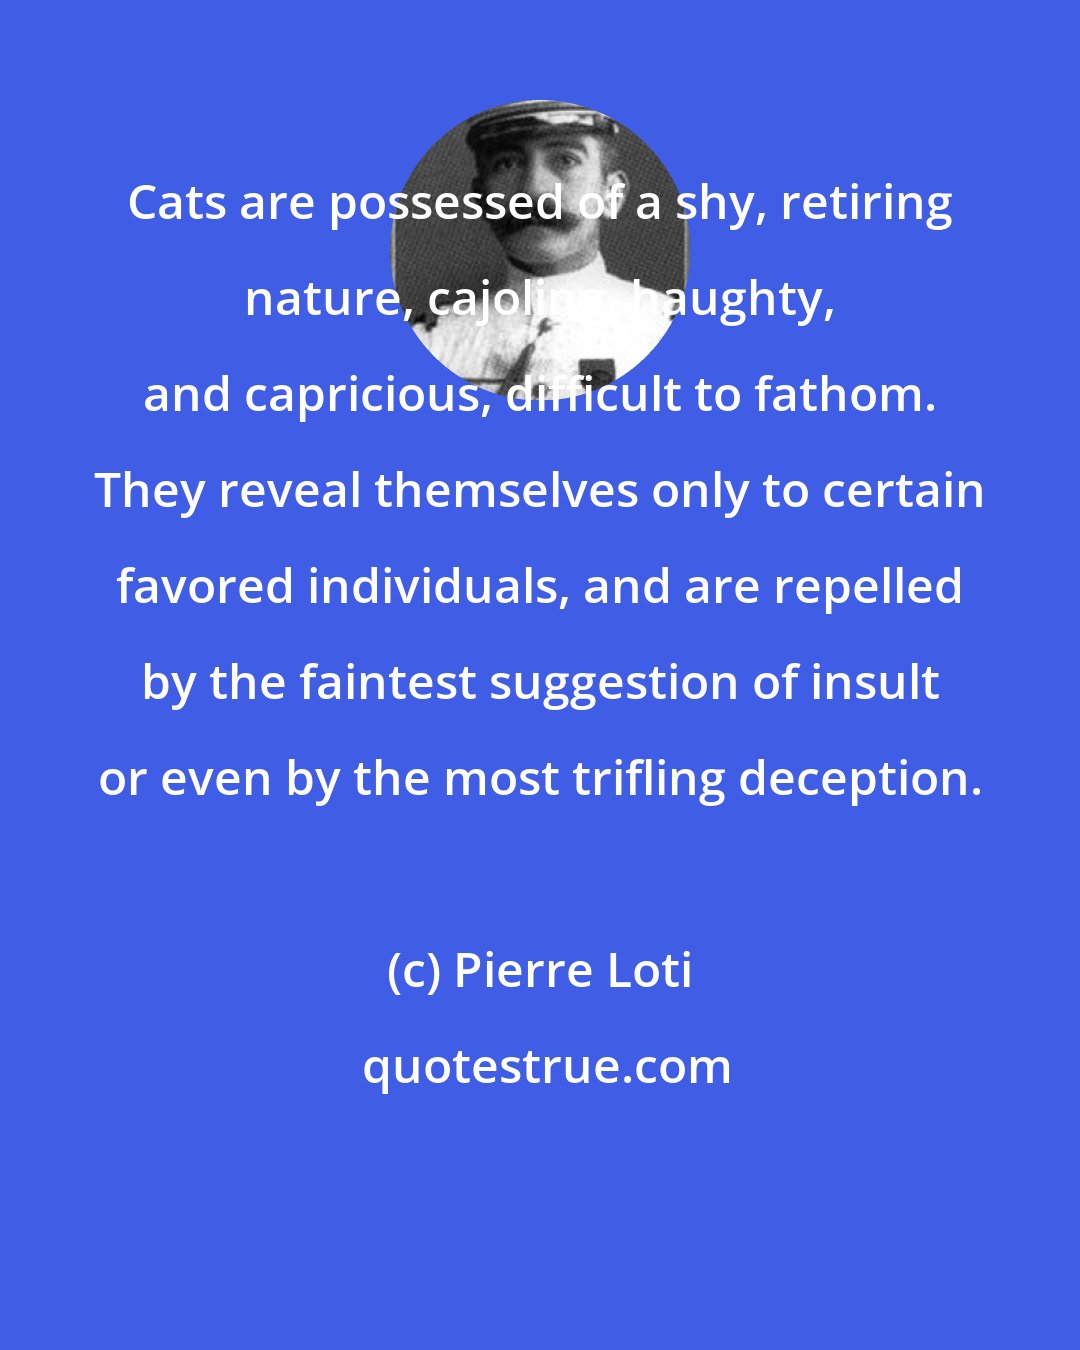 Pierre Loti: Cats are possessed of a shy, retiring nature, cajoling, haughty, and capricious, difficult to fathom. They reveal themselves only to certain favored individuals, and are repelled by the faintest suggestion of insult or even by the most trifling deception.